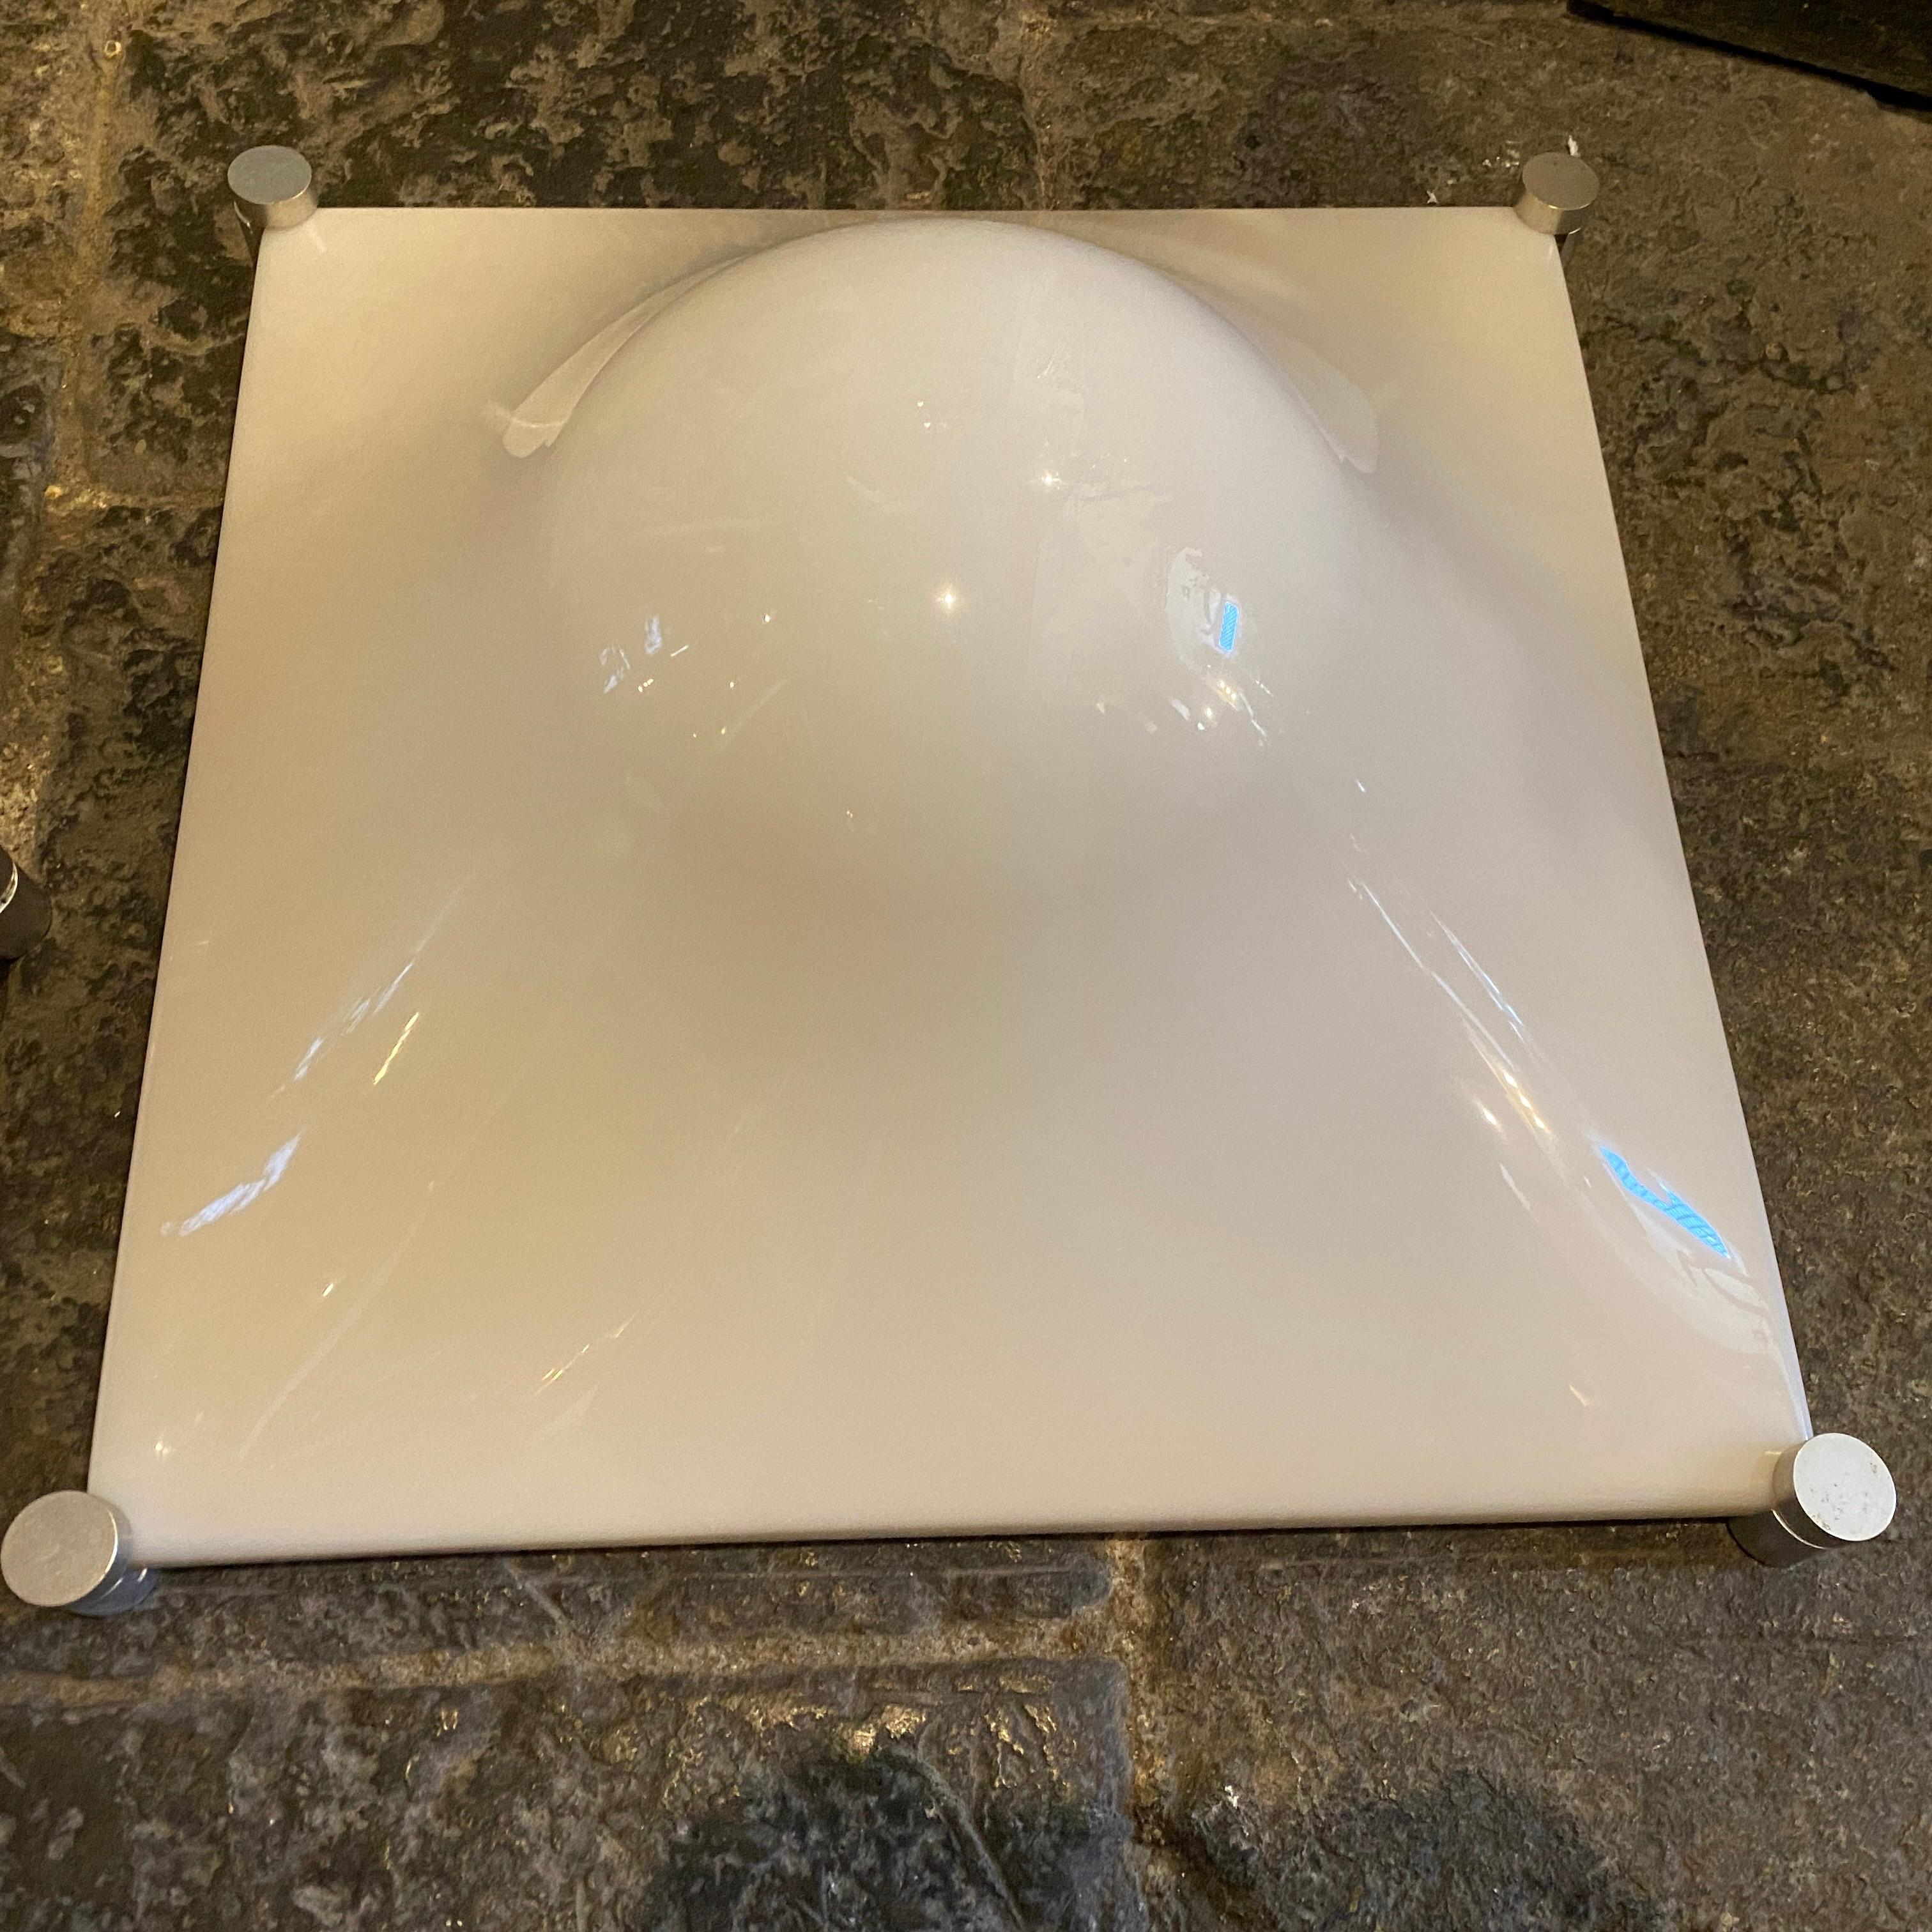 Two square wall lights also usable as ceiling light designed in 1965 by Elio Martinelli and manufactured in Italy in the Space Age Era, acrylic and aluminium parts are in very good conditions. The Bolla Wall Lights by Elio Martinelli, showcases a